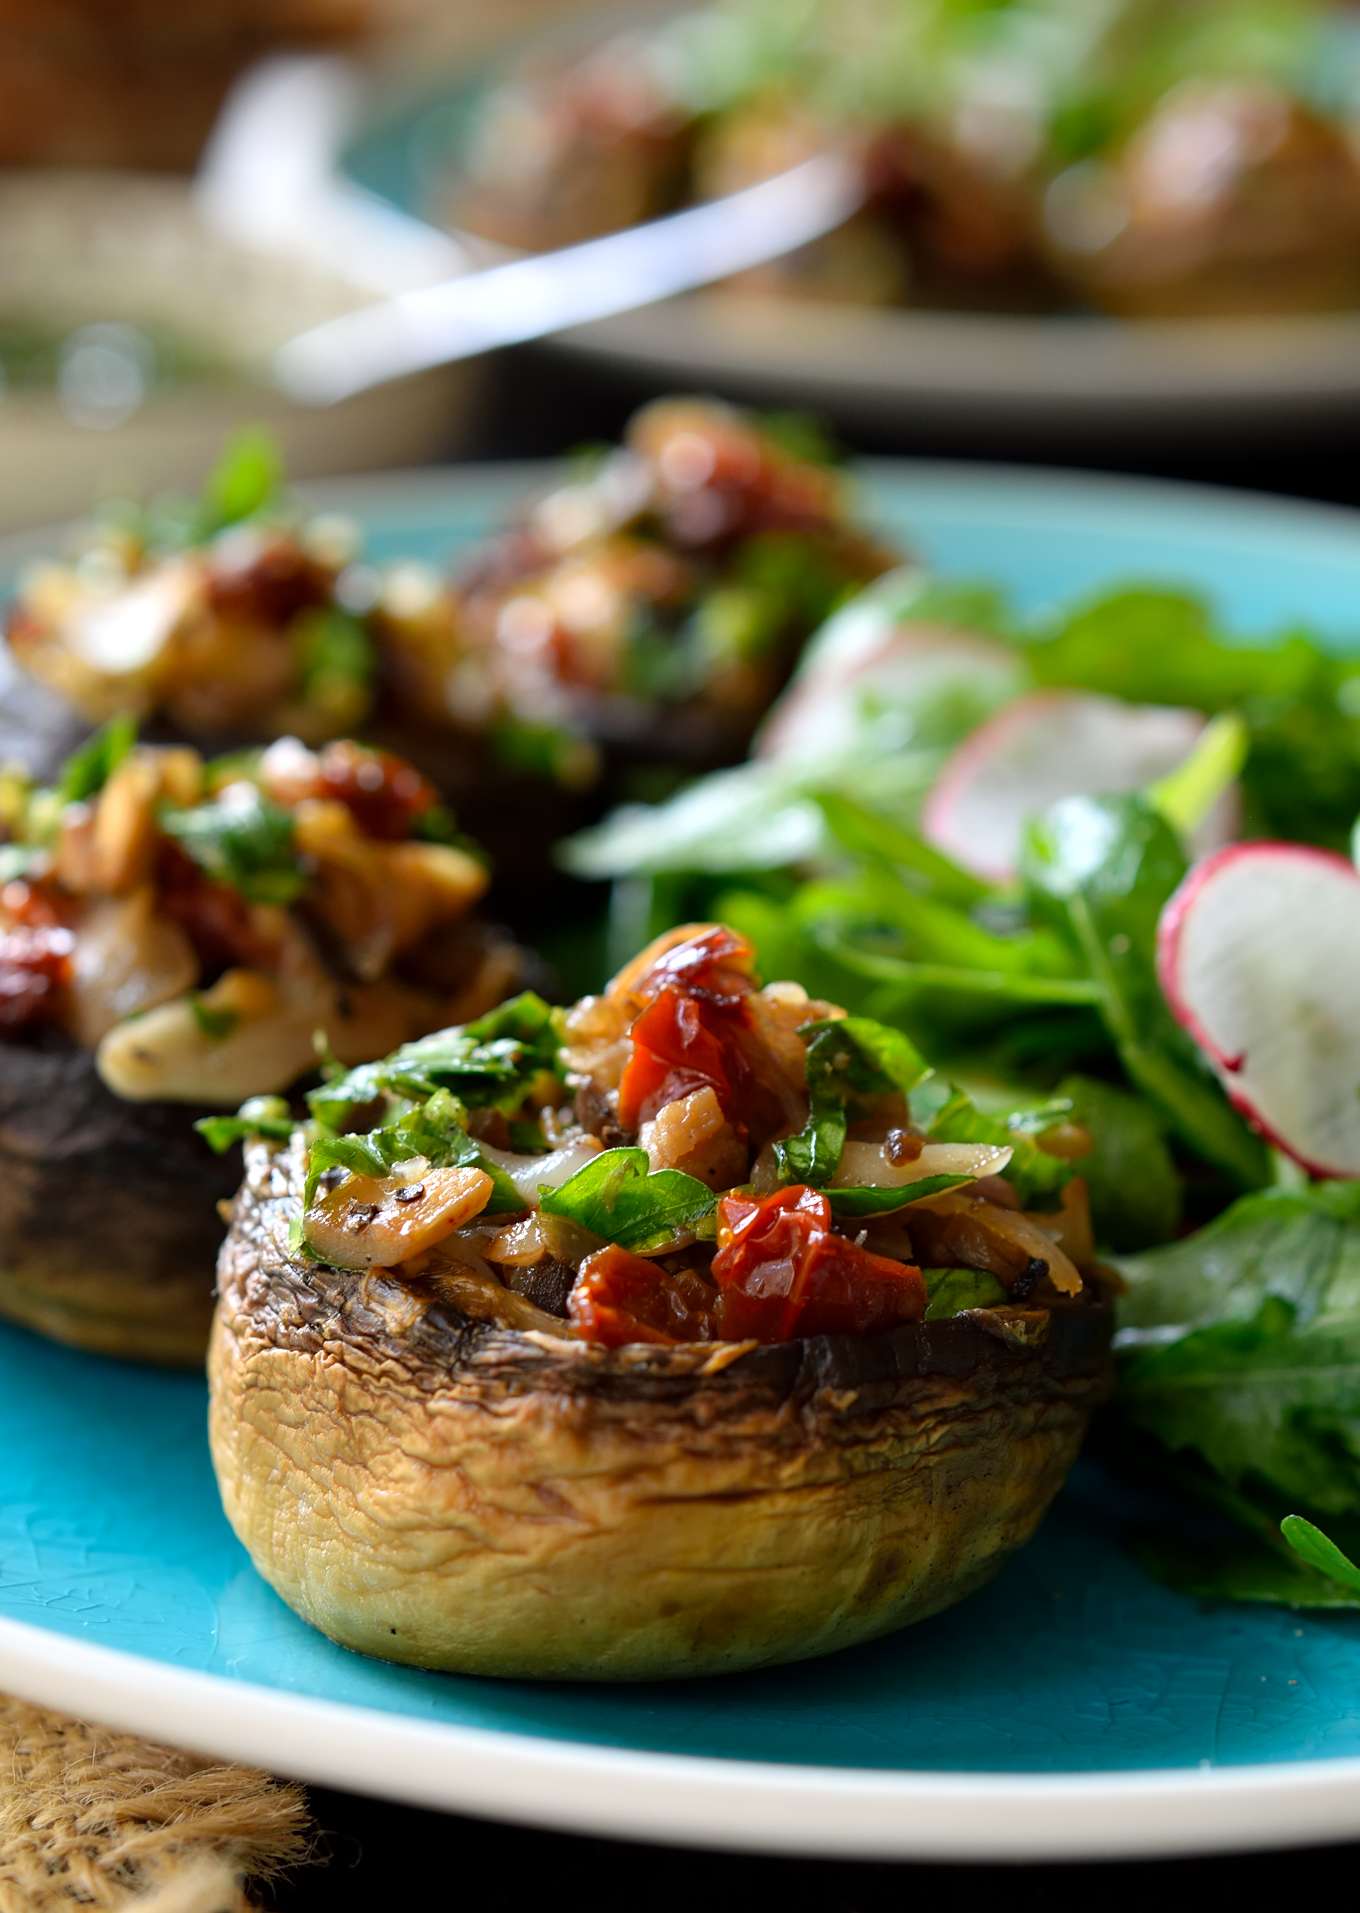 Vegan stuffed mushrooms are easy to make and packed with fresh herb-y, garlicky, citrus-y deliciousness. These little guys are great served as party finger food, a starter or a light main dish when paired with a fresh salad and crusty bread.